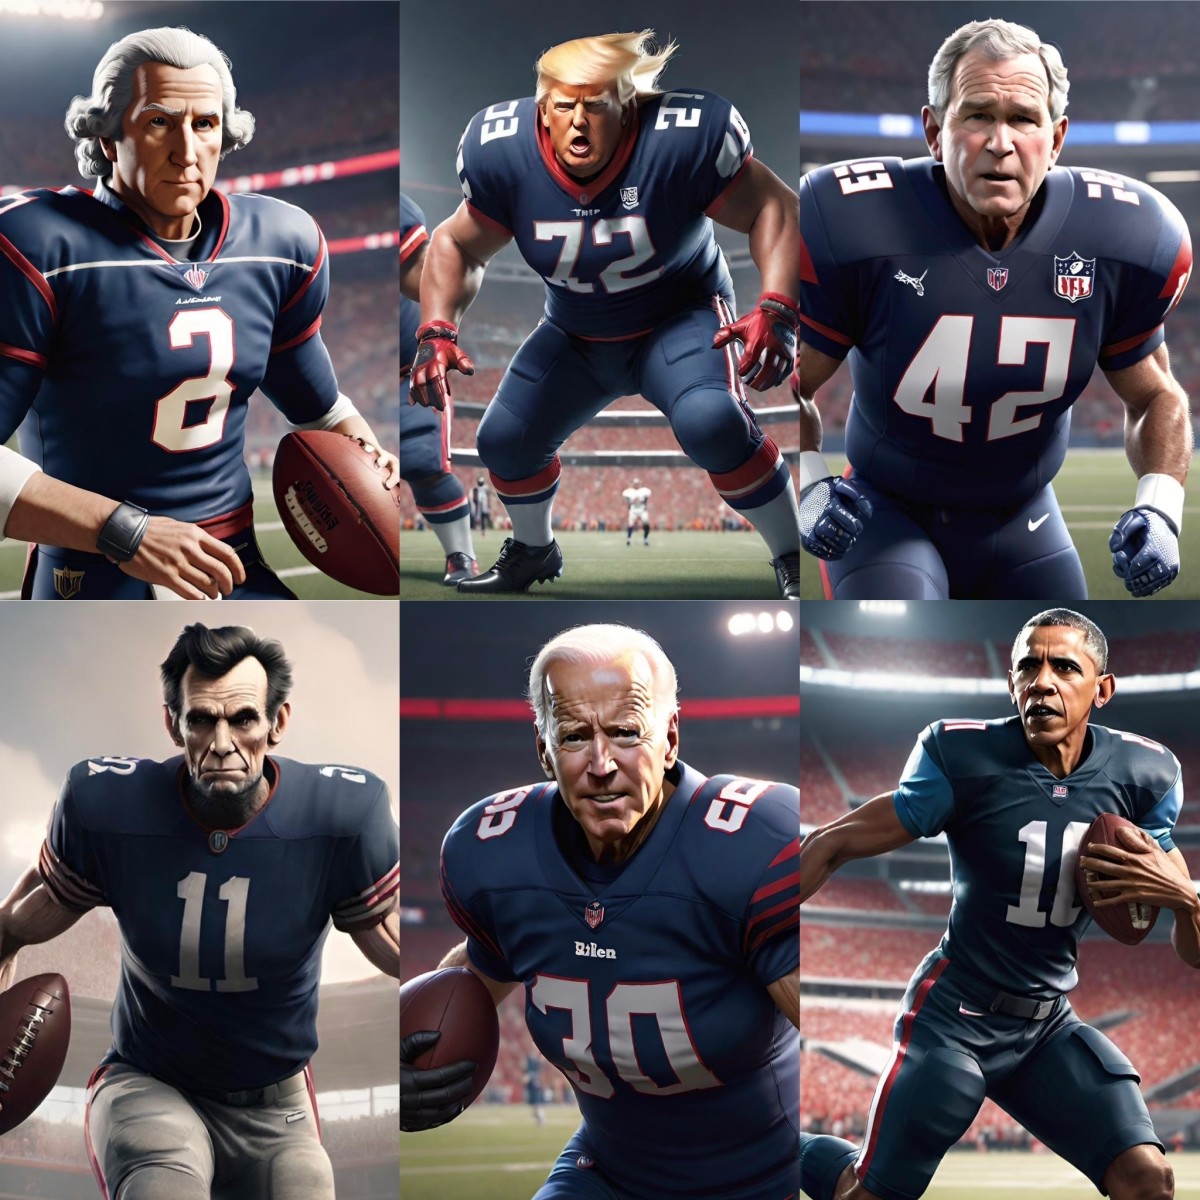 Presidents’ Day Gridiron: How I Would Construct a Football Team Comprised of U. S. Presidents